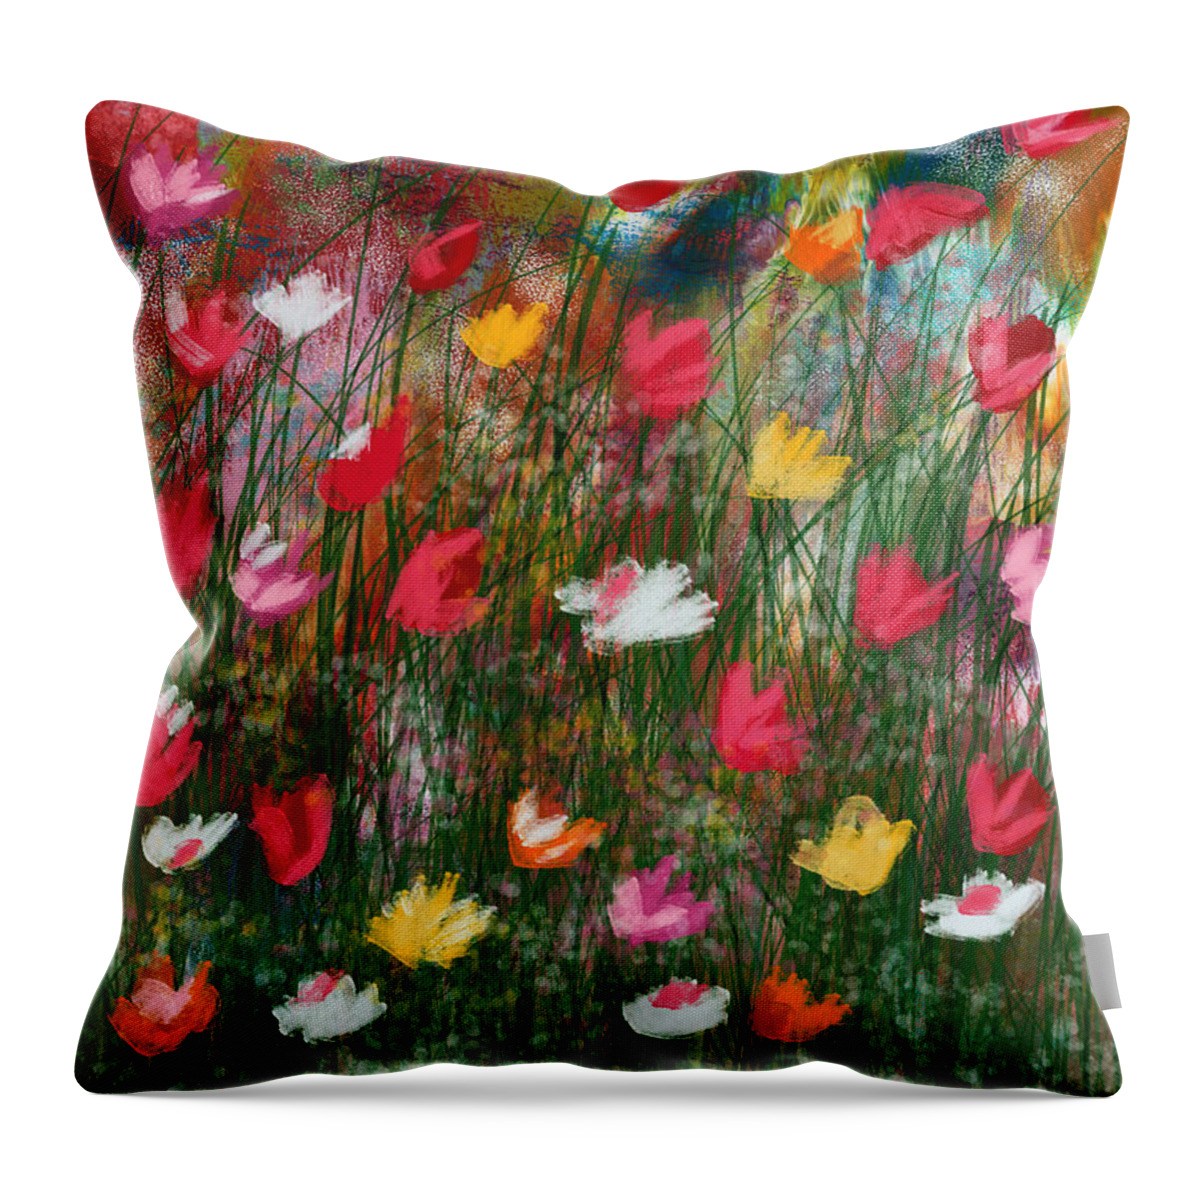 Flowers Throw Pillow featuring the mixed media Wildest Flowers 3- Art by Linda Woods by Linda Woods